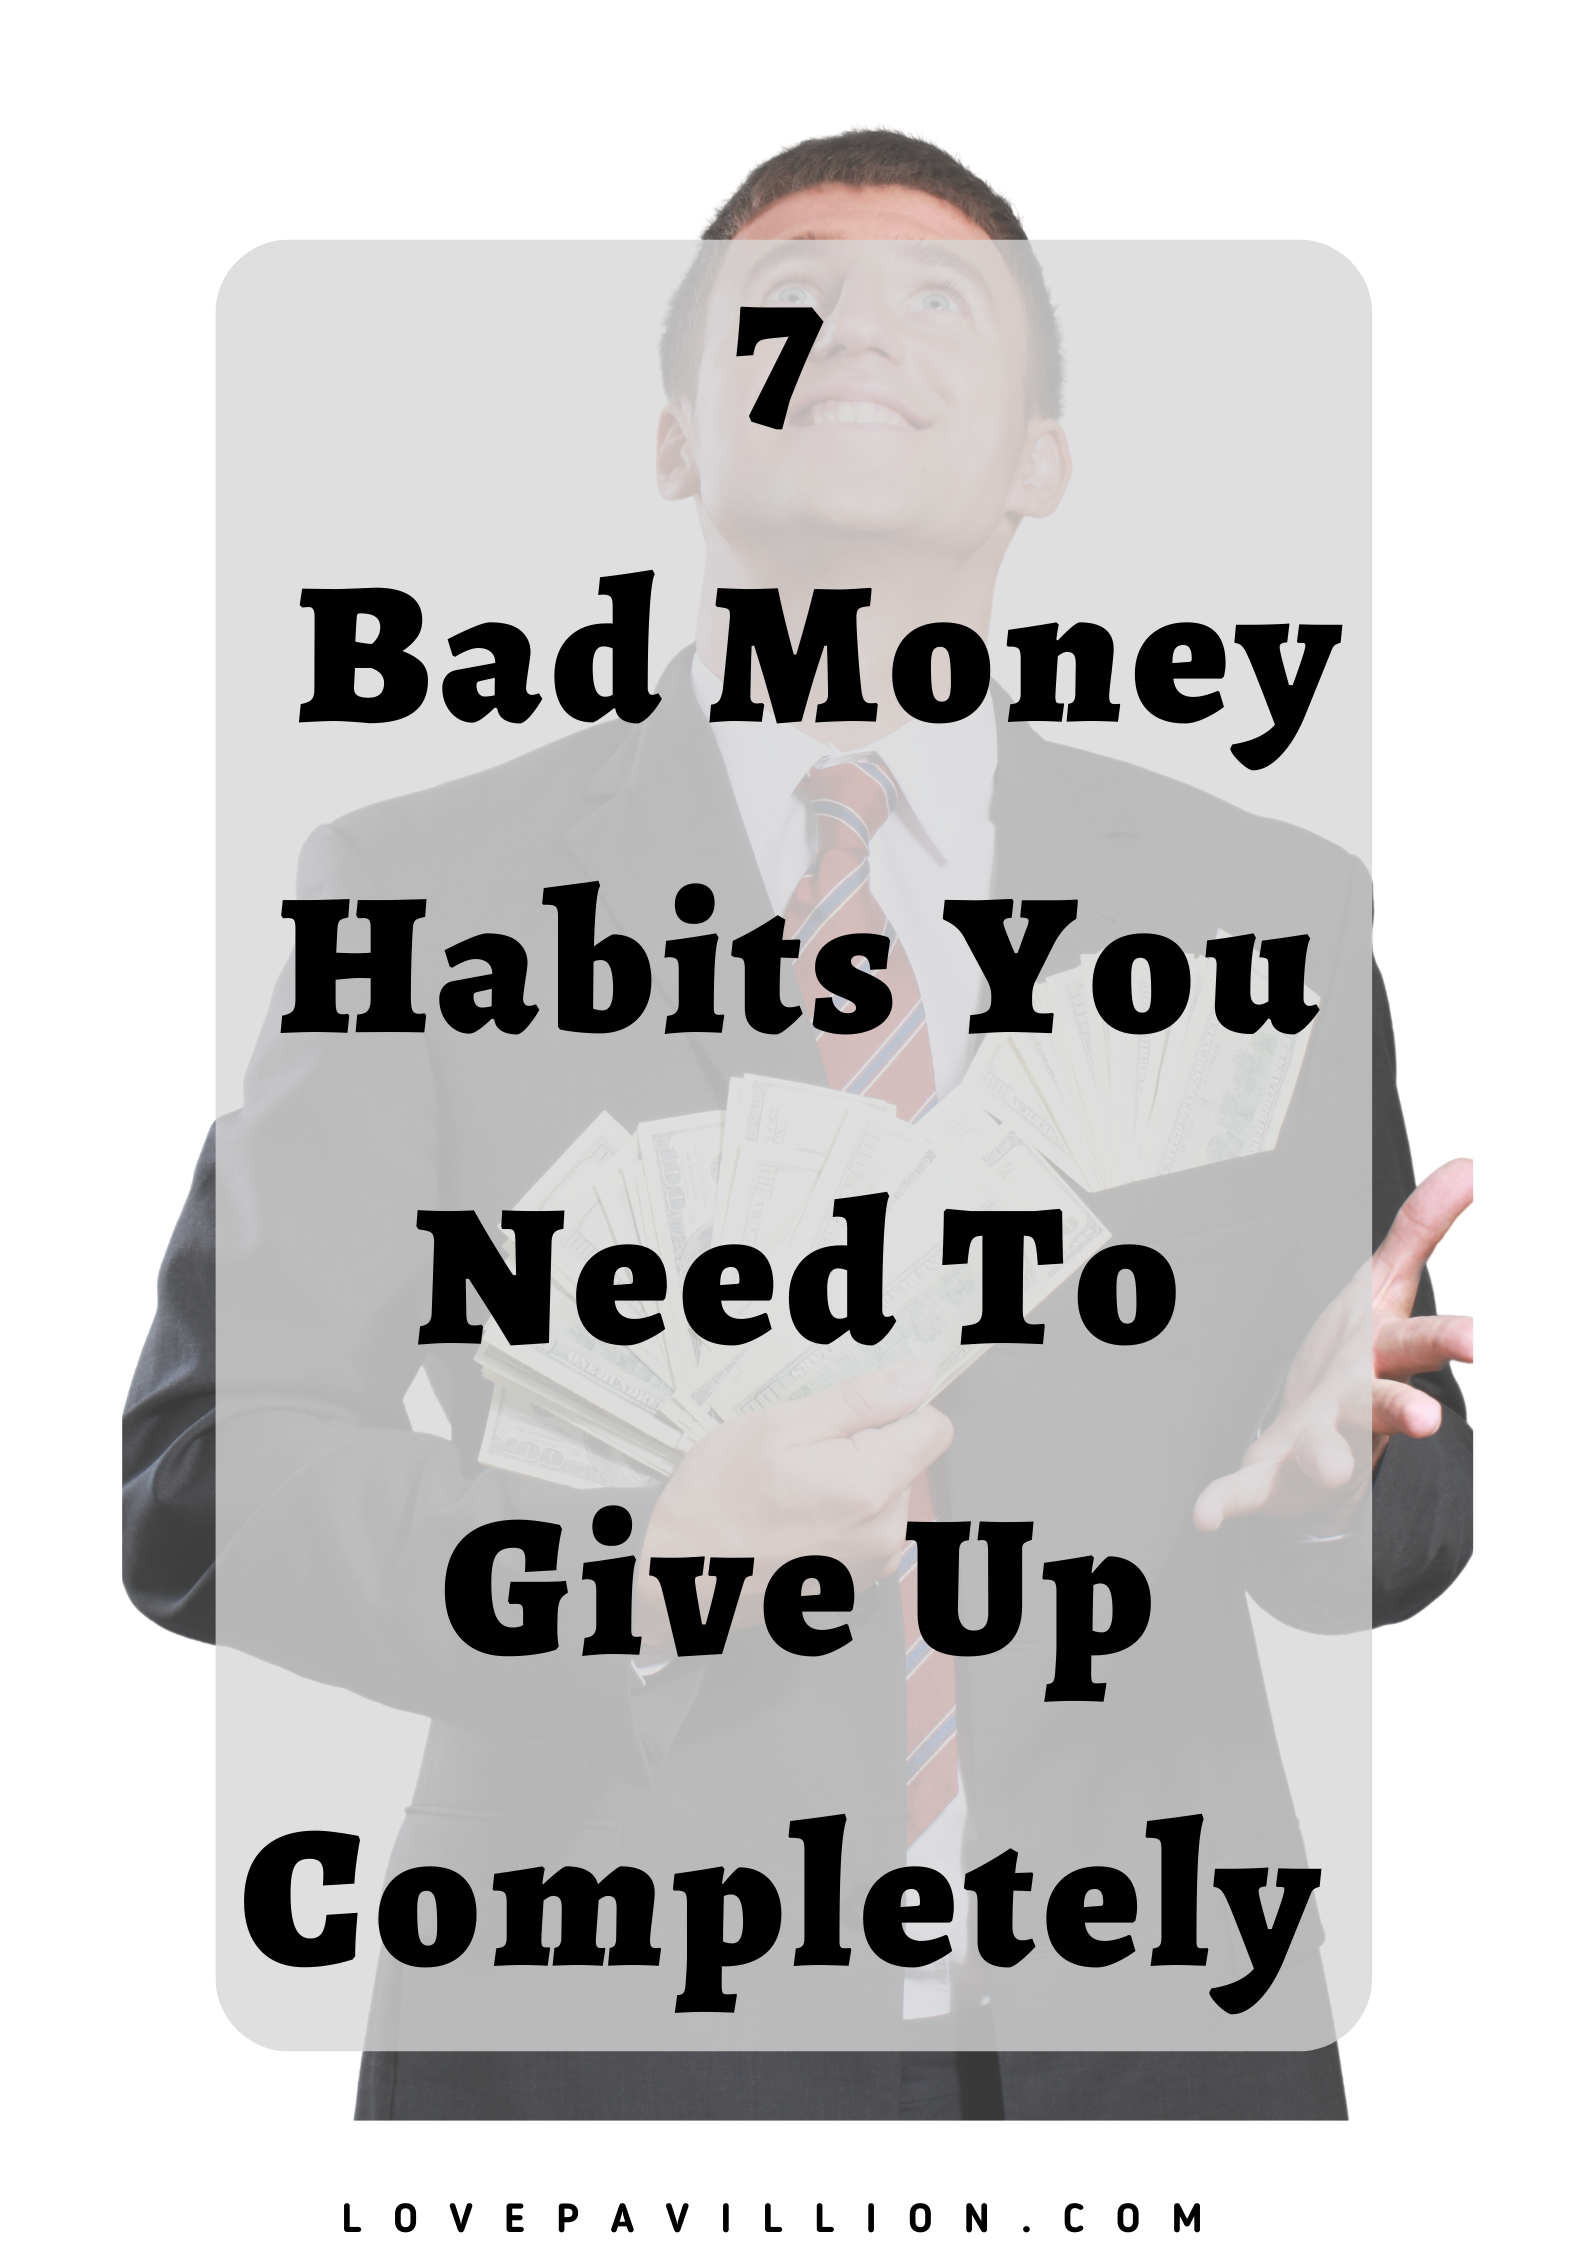 Bad Money Habits to Give Up